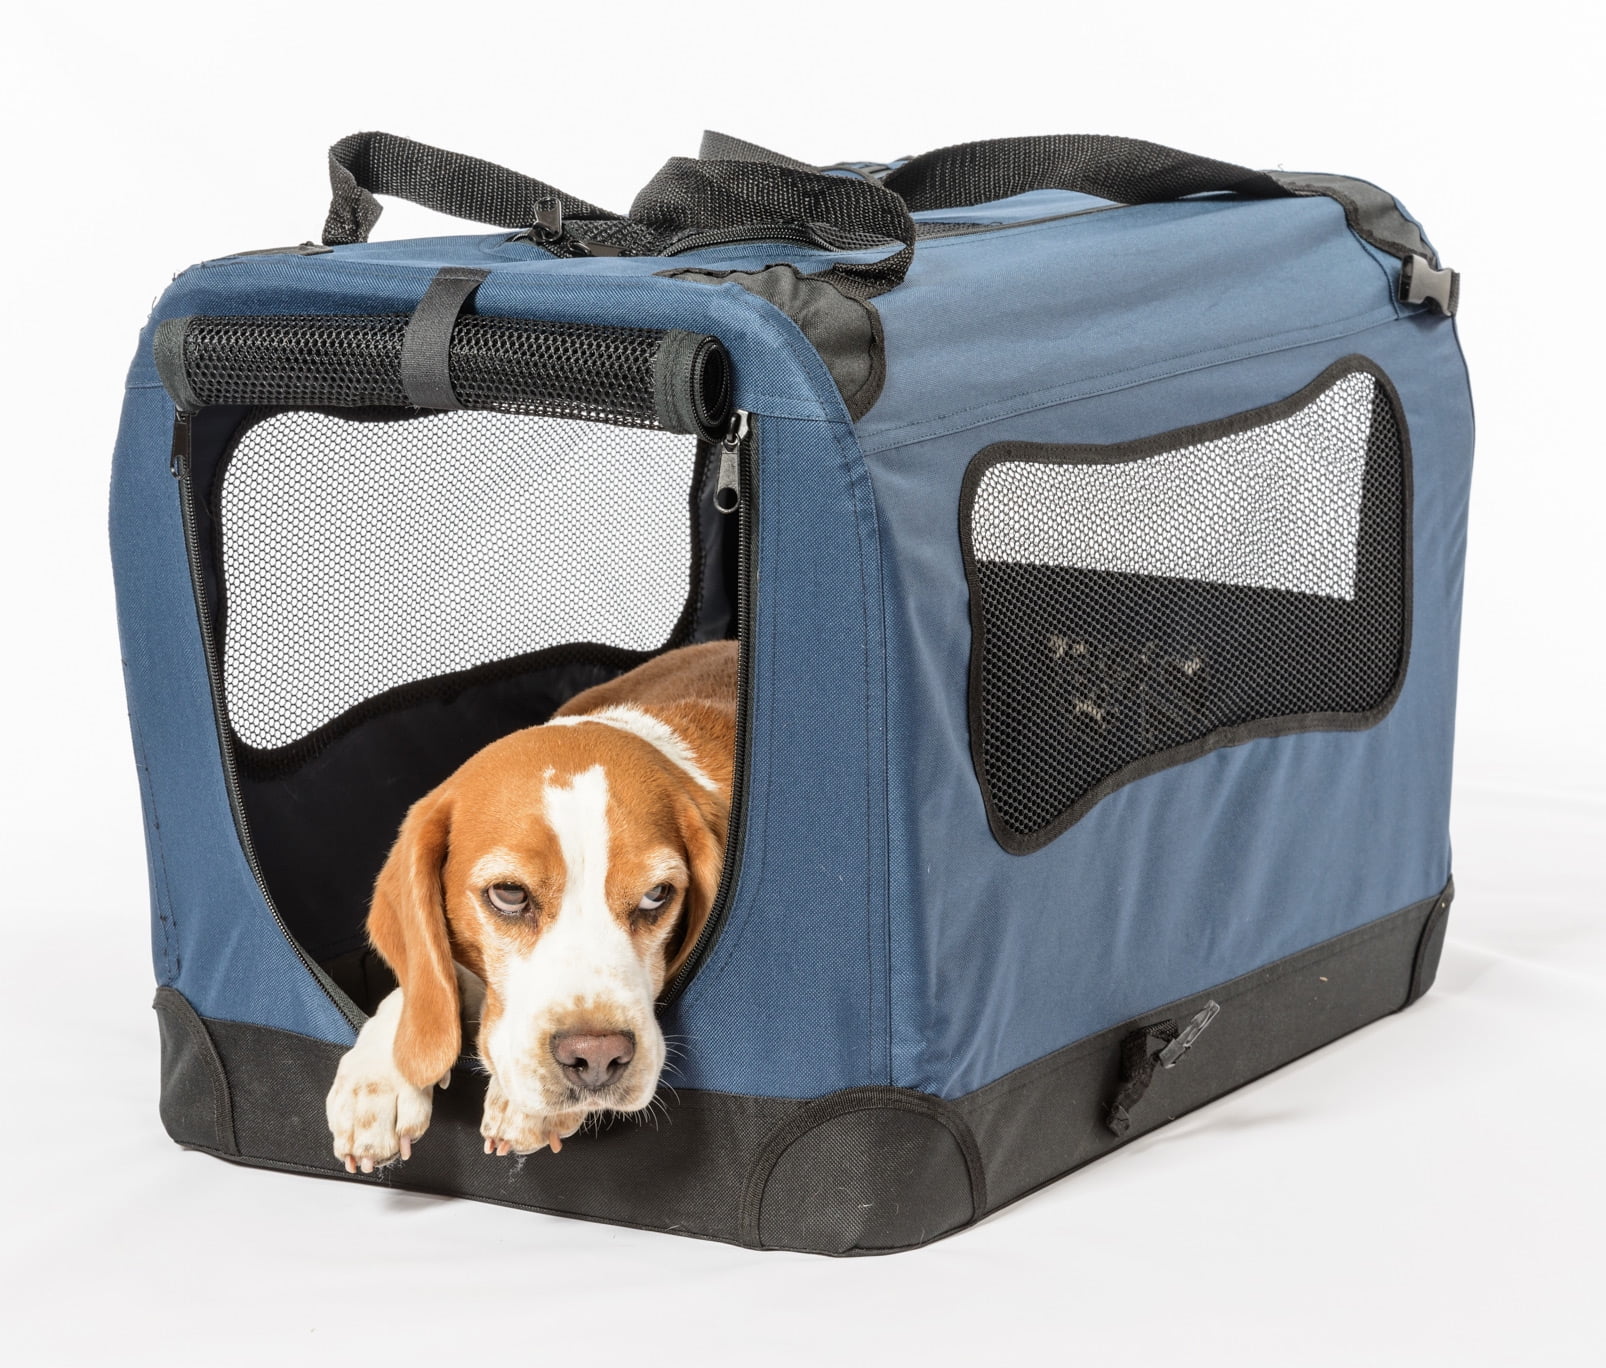 2PET Foldable Dog Crate Soft, Easy to Fold & Carry Dog Crate for Indoor & Outdoor Use Comfy